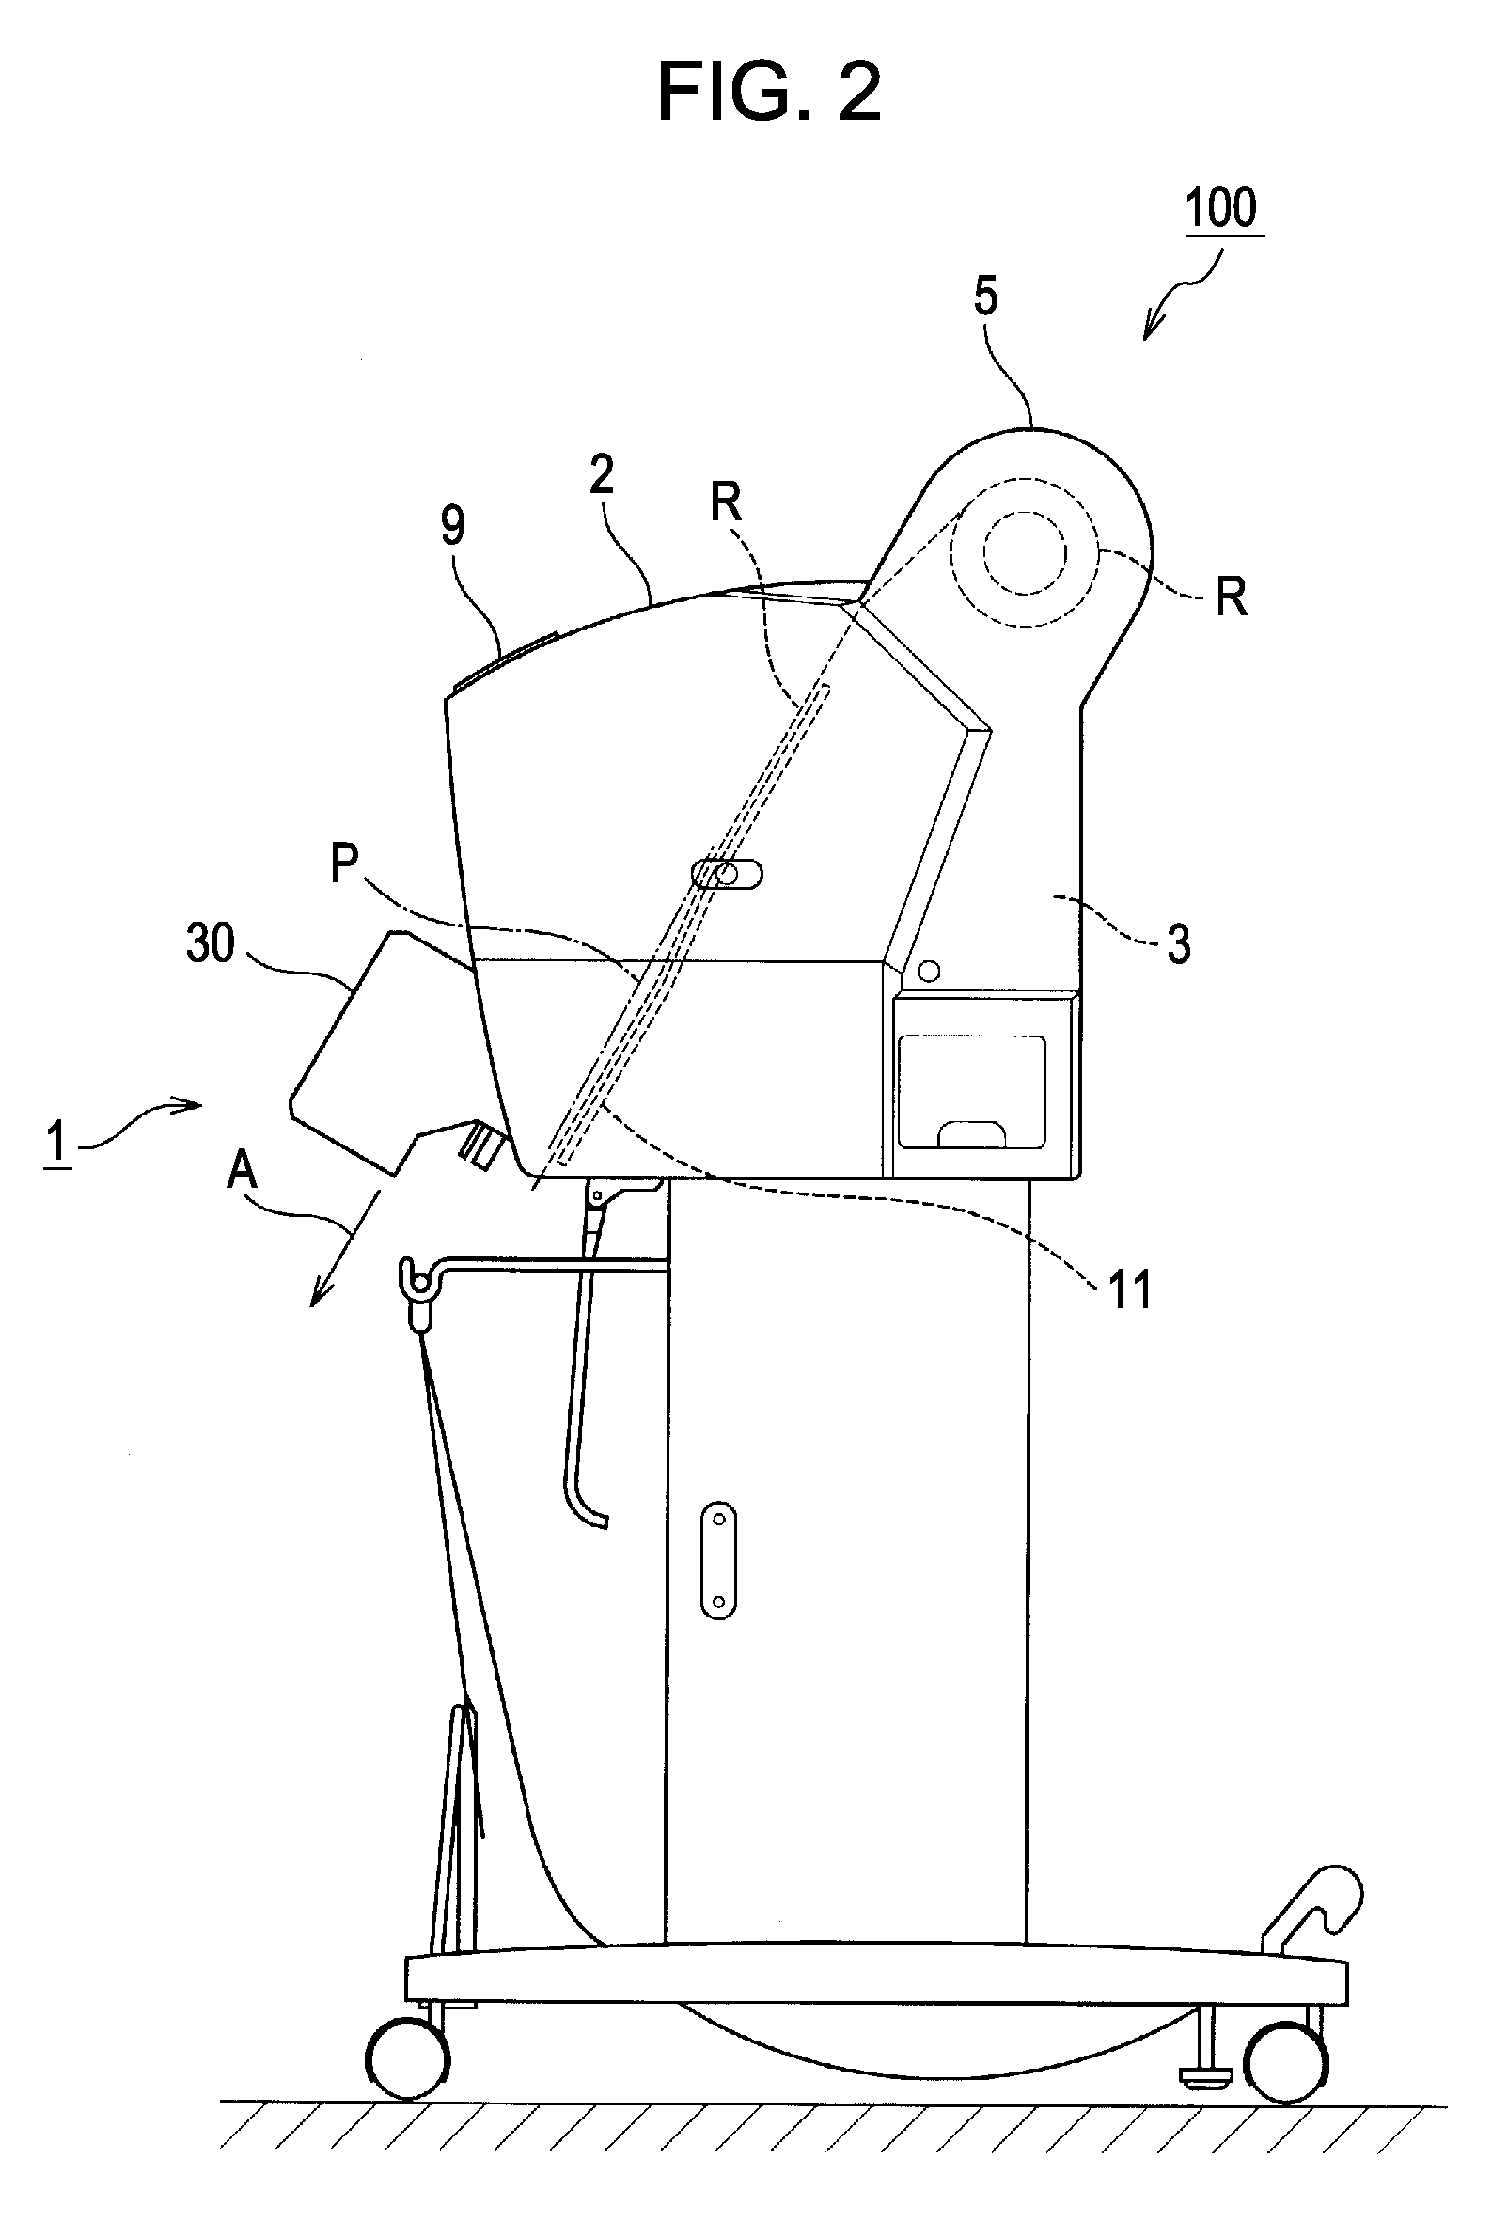 Unit for measuring color and recording apparatus